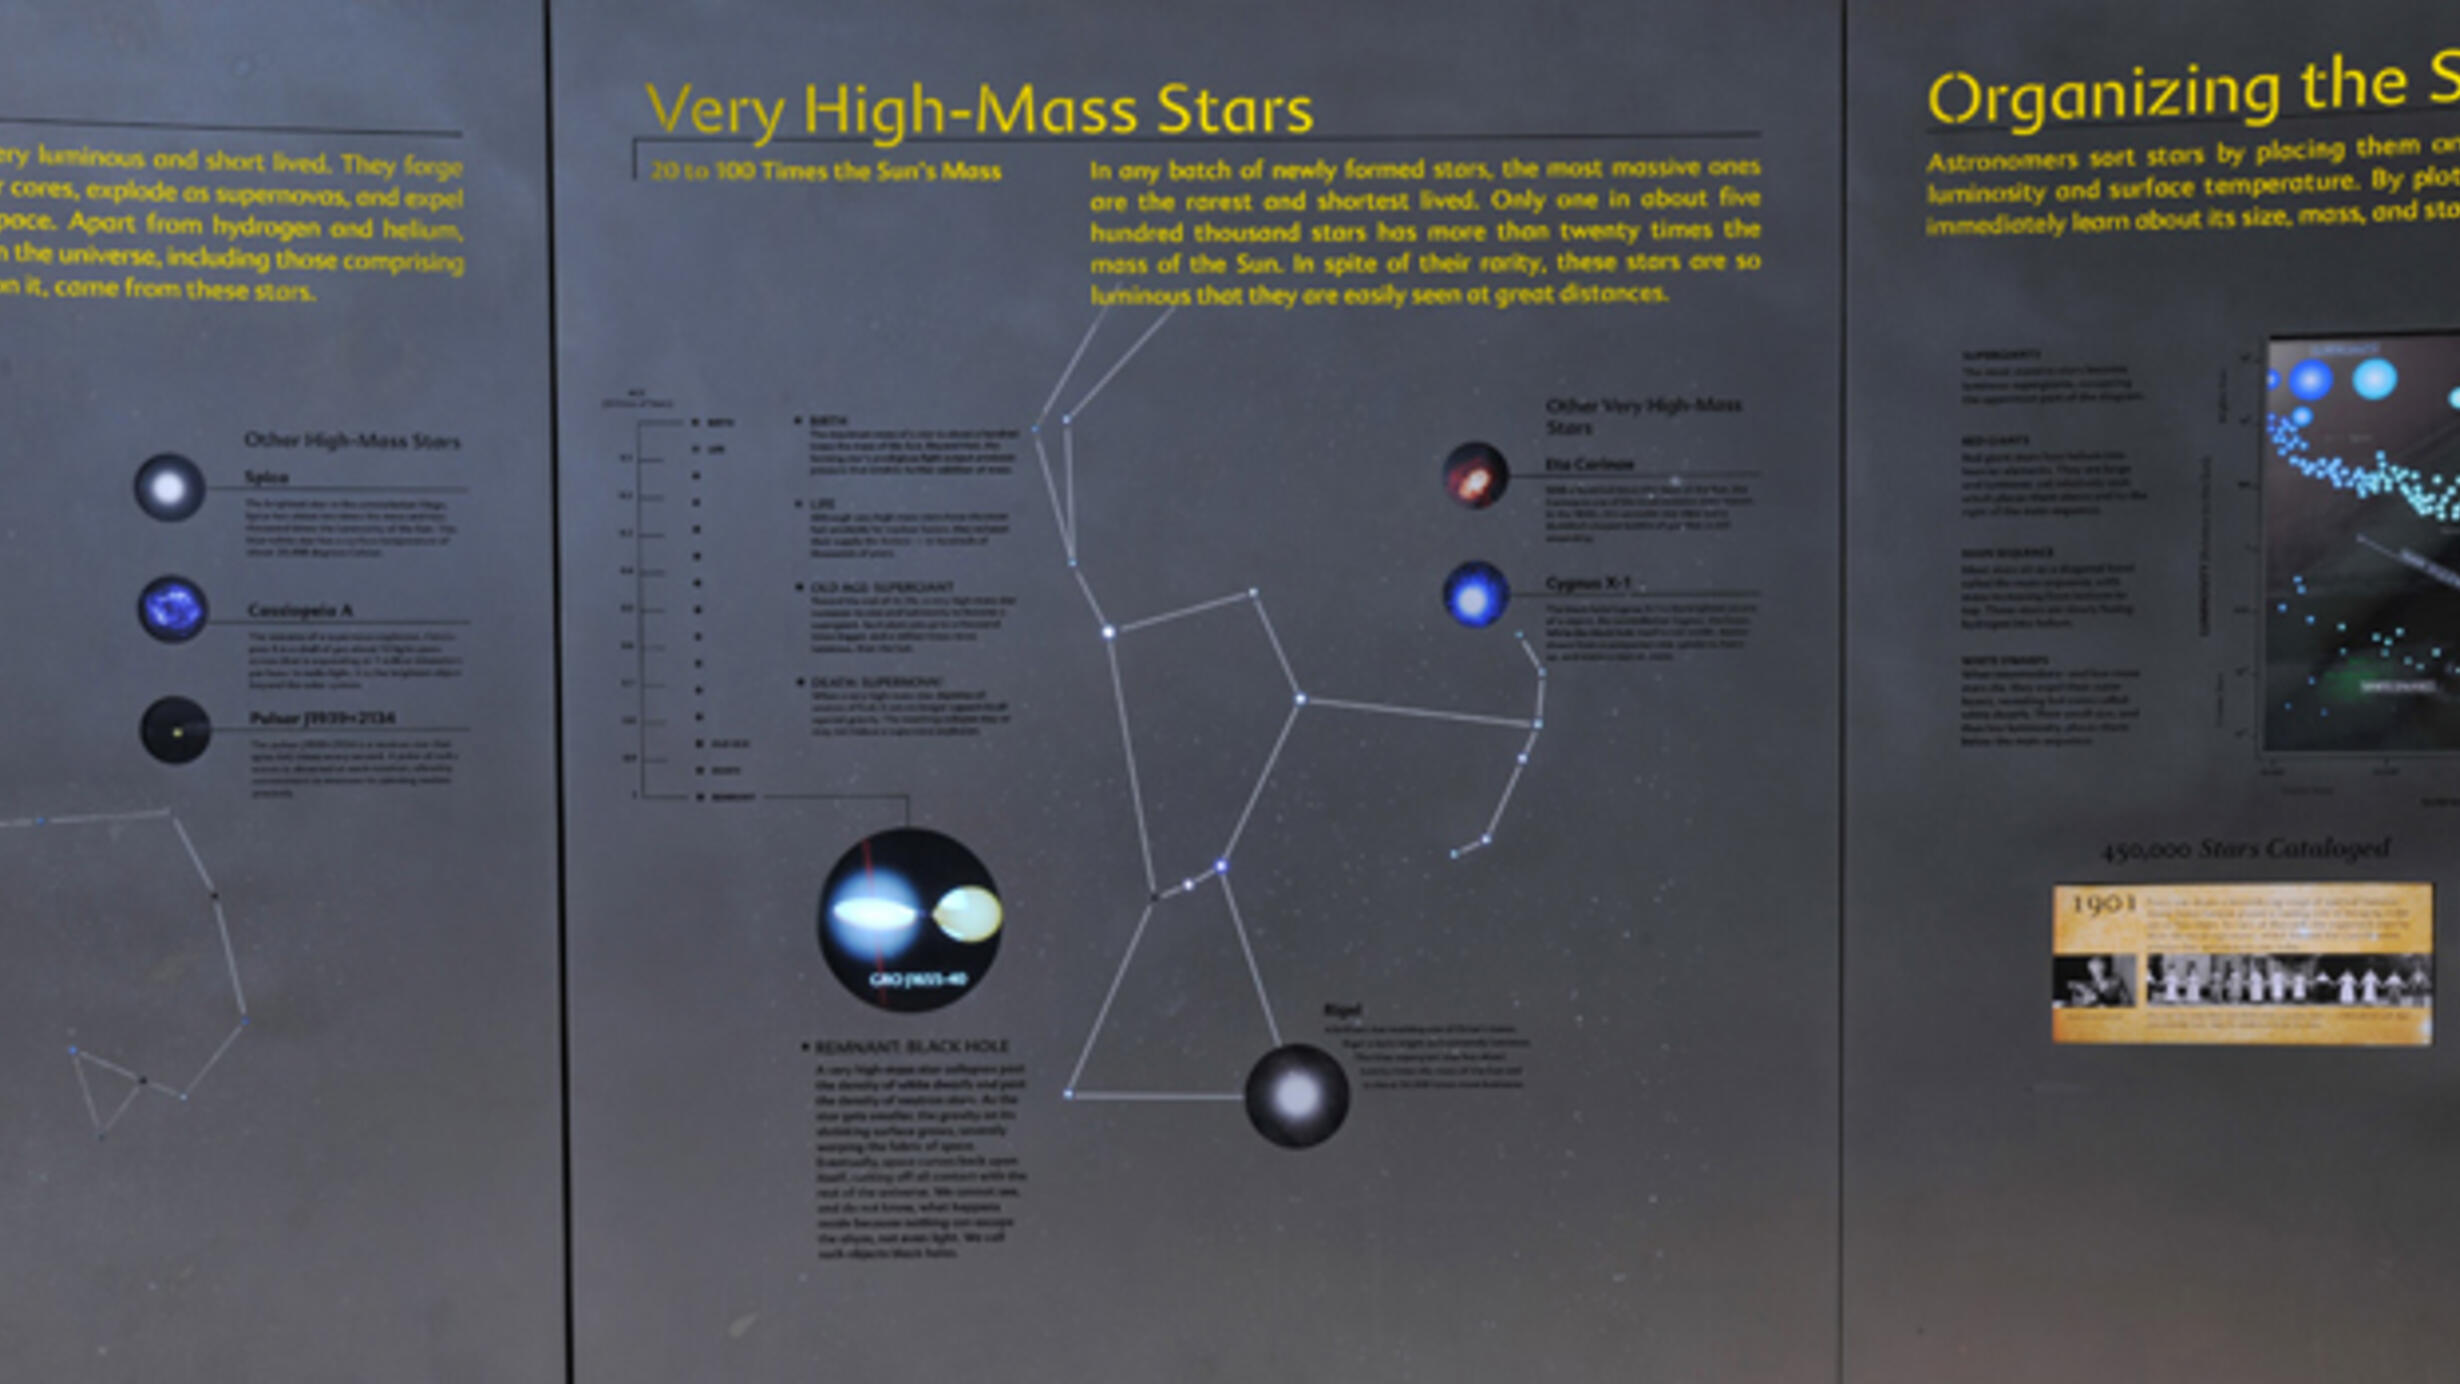 Diagram of Very High-Mass Stars (20–100 times that of Sun) from star exhibition